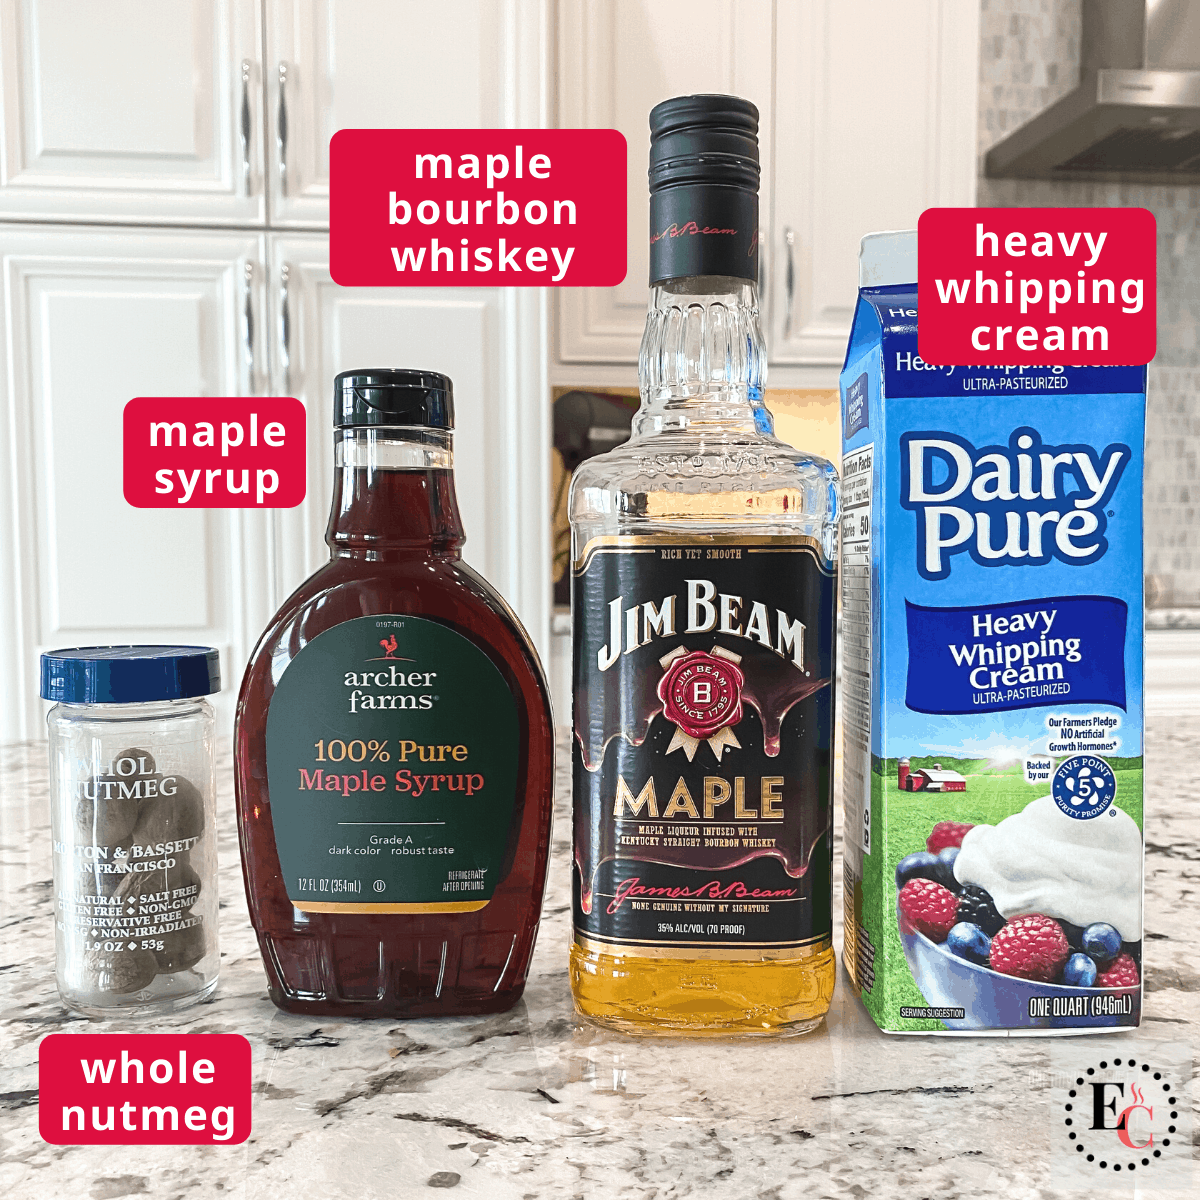 Ingredients for a Jim Beam Maple Bourbon Cocktail, from left to right: whole nutmeg, maple syrup, jim beam maple bourbon, heavy whipping cream.